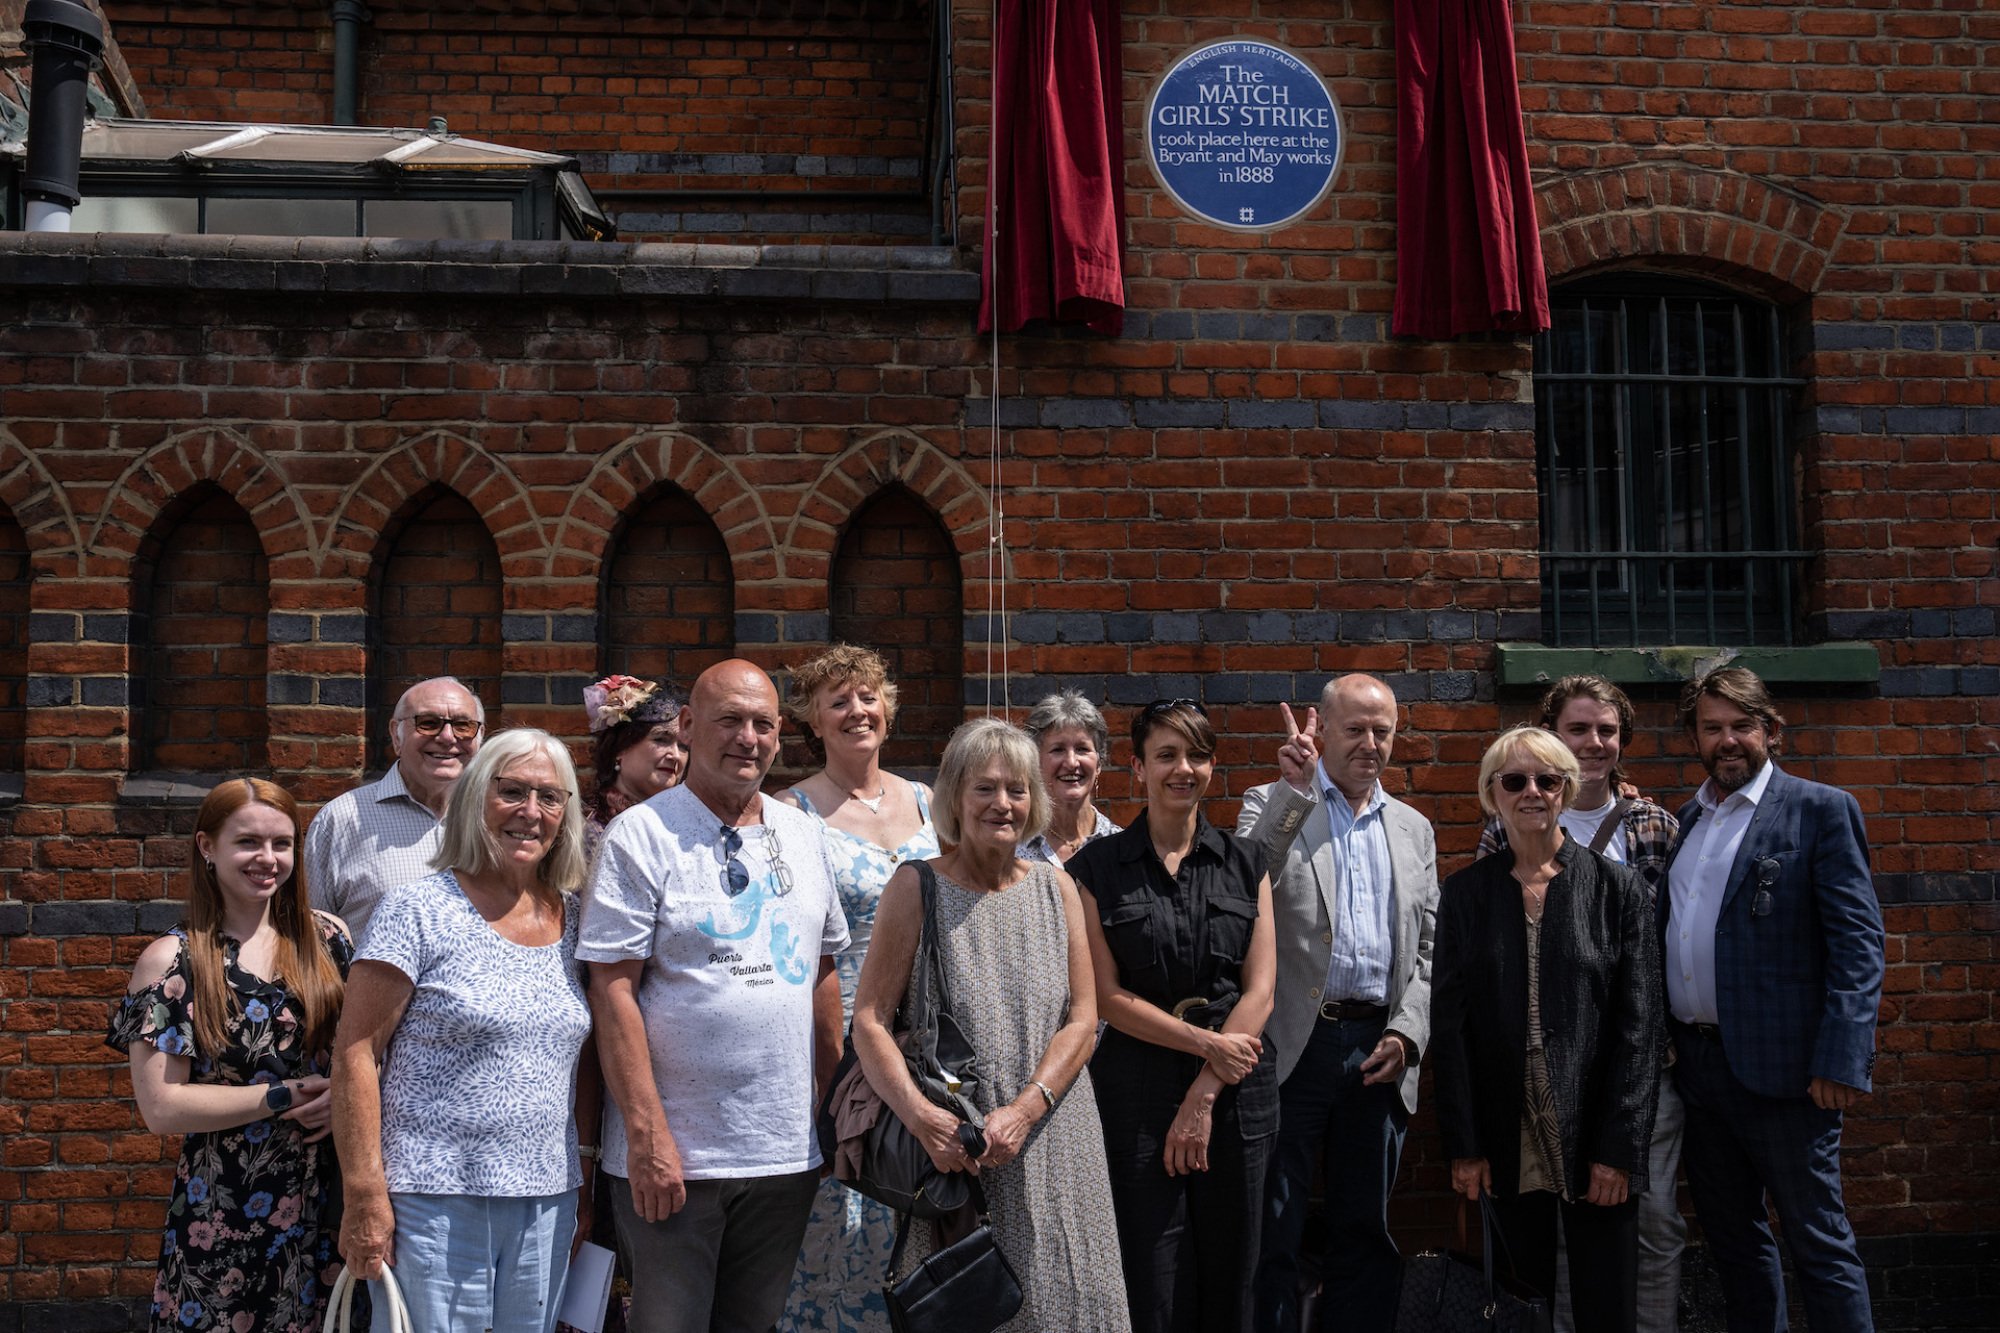 A group of people stand for a photograph together outside a brick wall with a blue plaque on it.